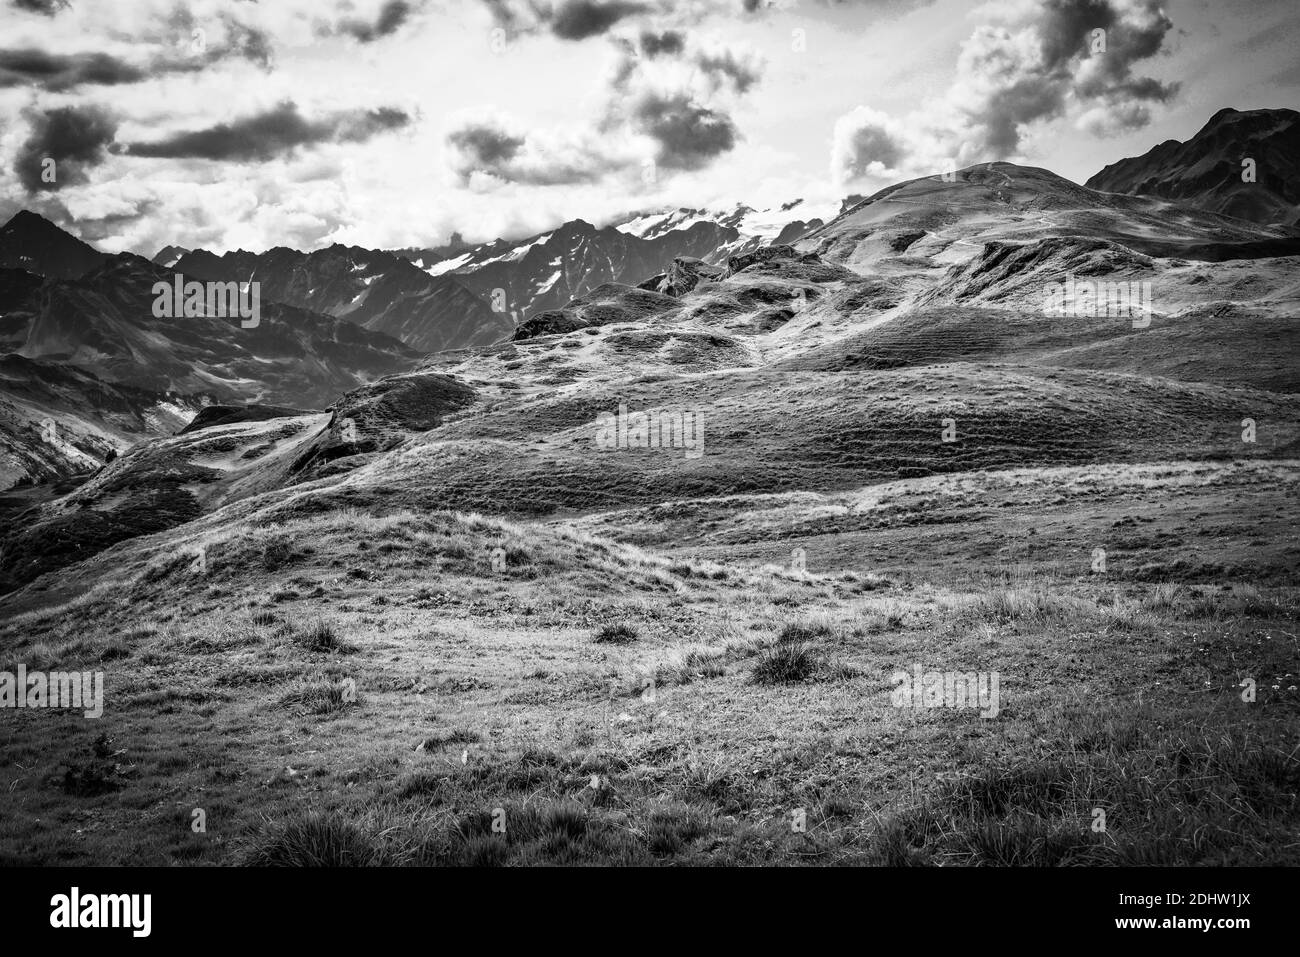 Amazing nature of Switzerland in the Swiss Alps in black and white Stock Photo